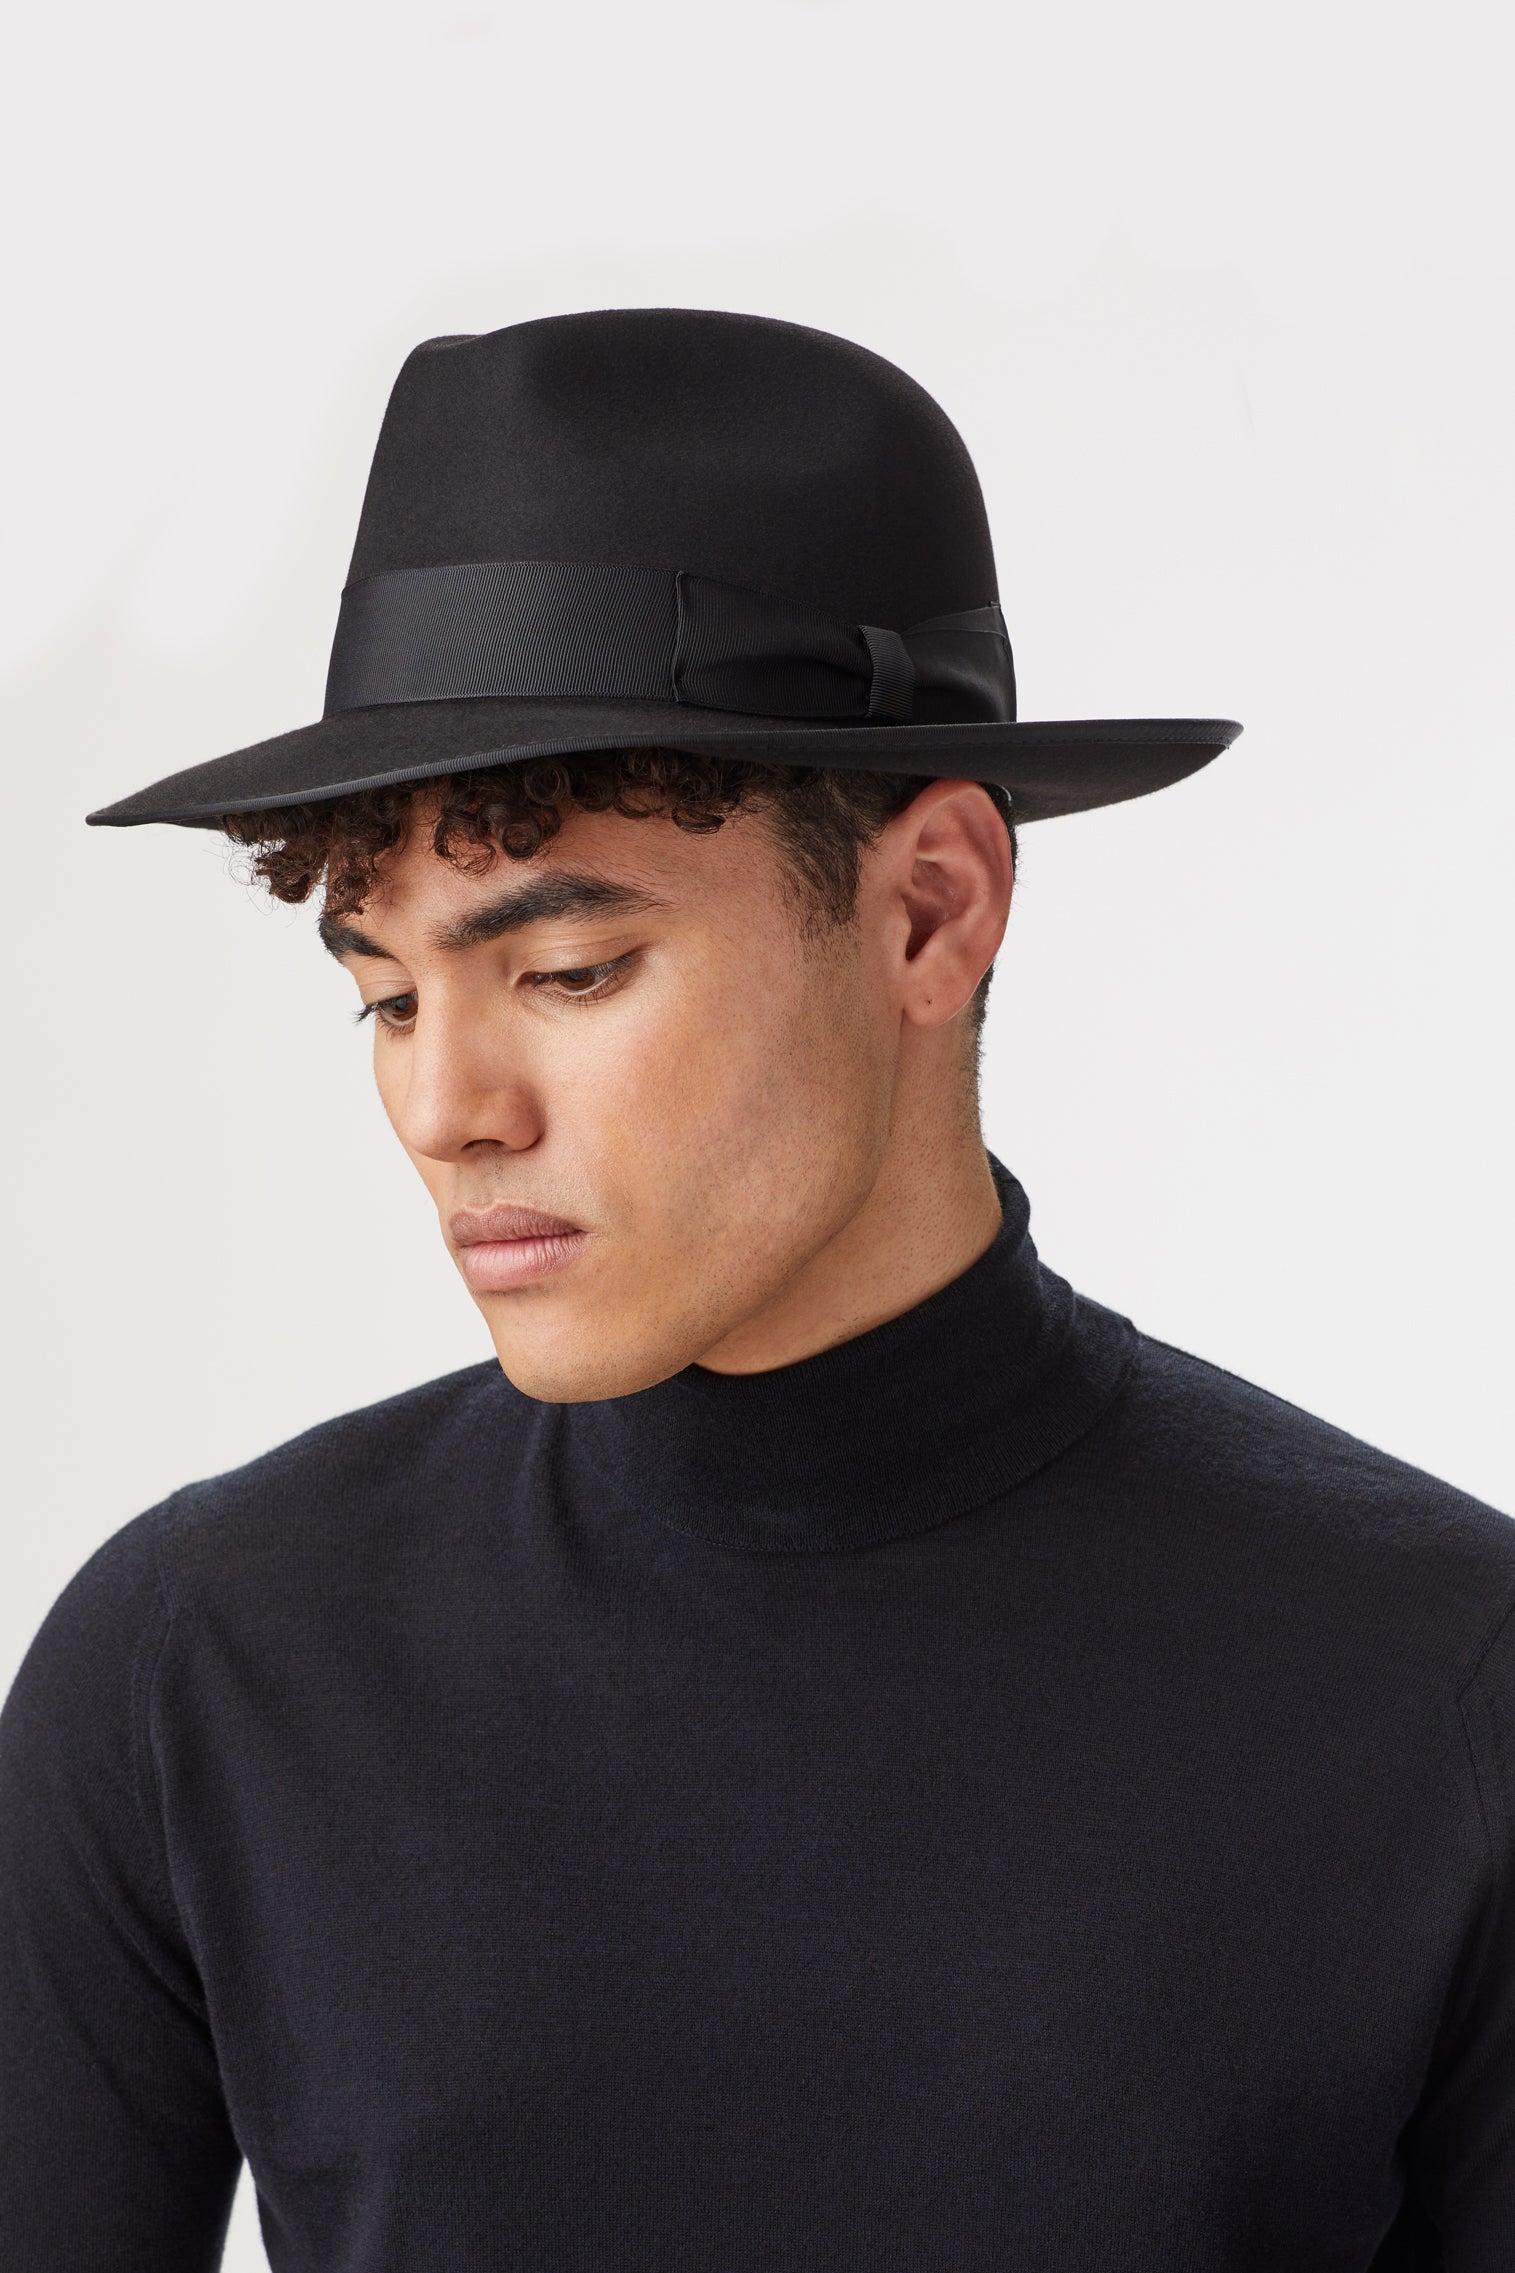 St James's Black Fedora - Father's Day Gift Guide - Lock & Co. Hatters London UK